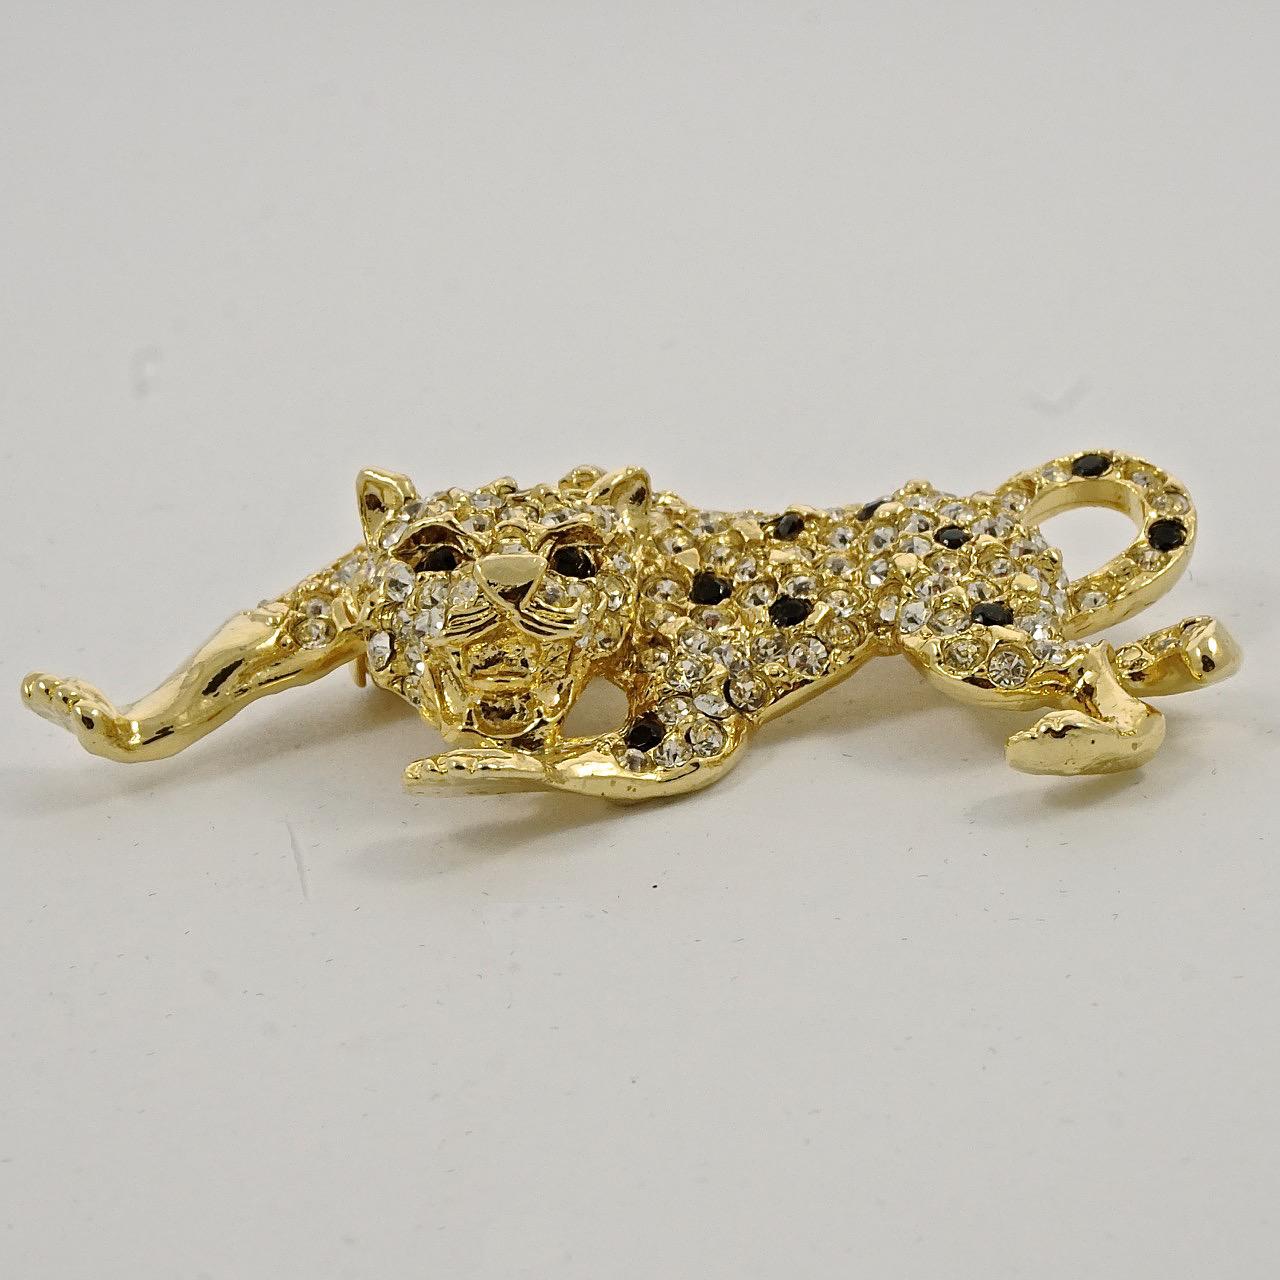 Gold Plated Leopard Brooch with Clear and Black Rhinestones circa 1980s For Sale 1